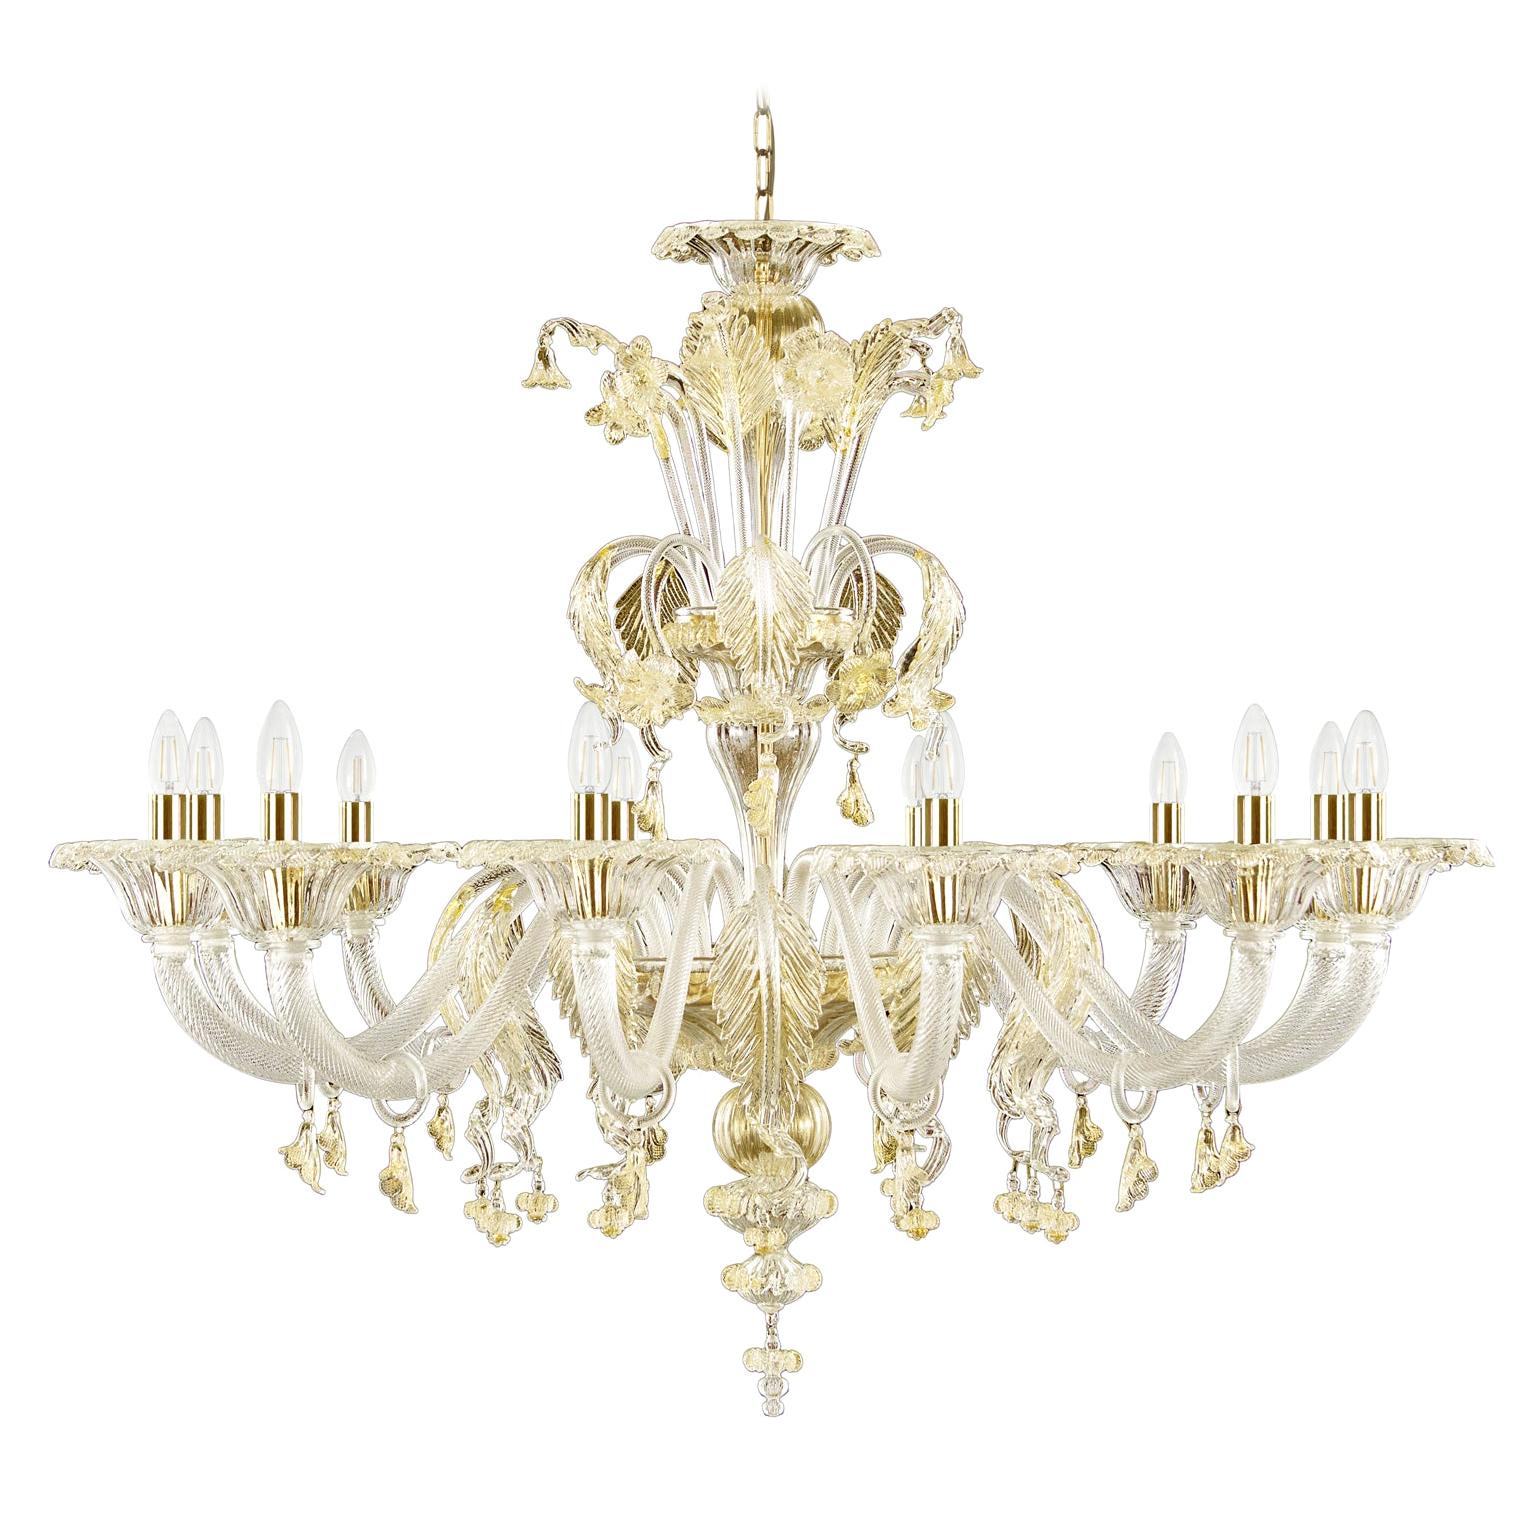 Artistic Murano Chandelier, 12 arms, clear Glass, Gold Details by Multiforme